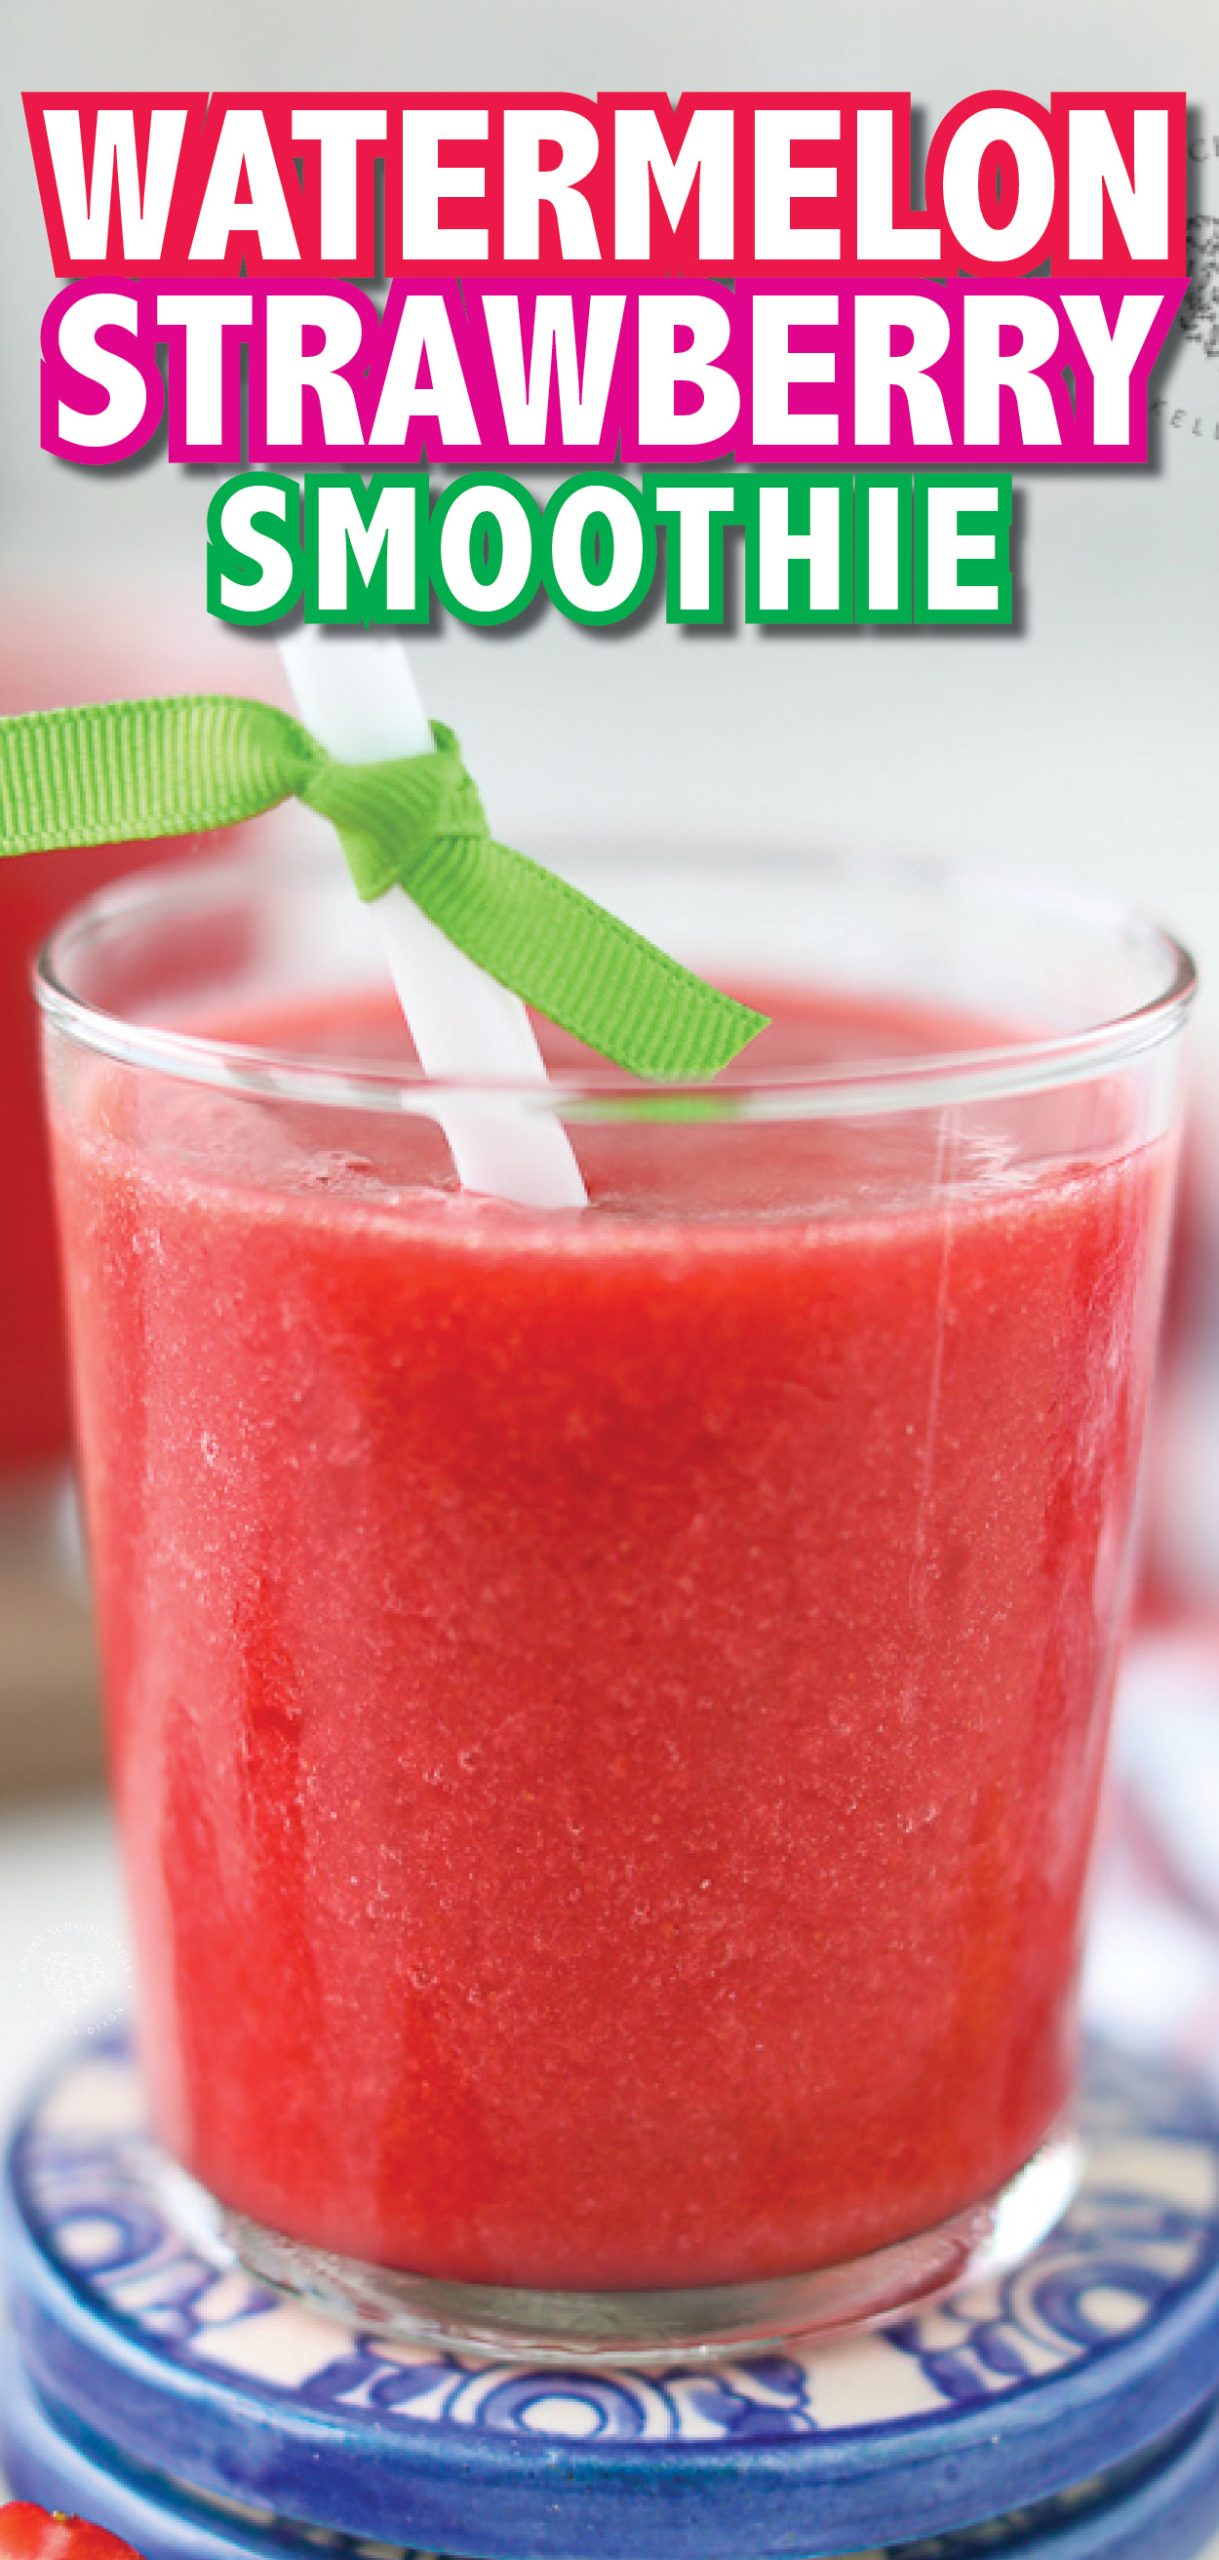 This refreshing Watermelon Strawberry Smoothie is a sweet and refreshing drink everyone loves! If summer vacation had a smoothie, this is what it would be!